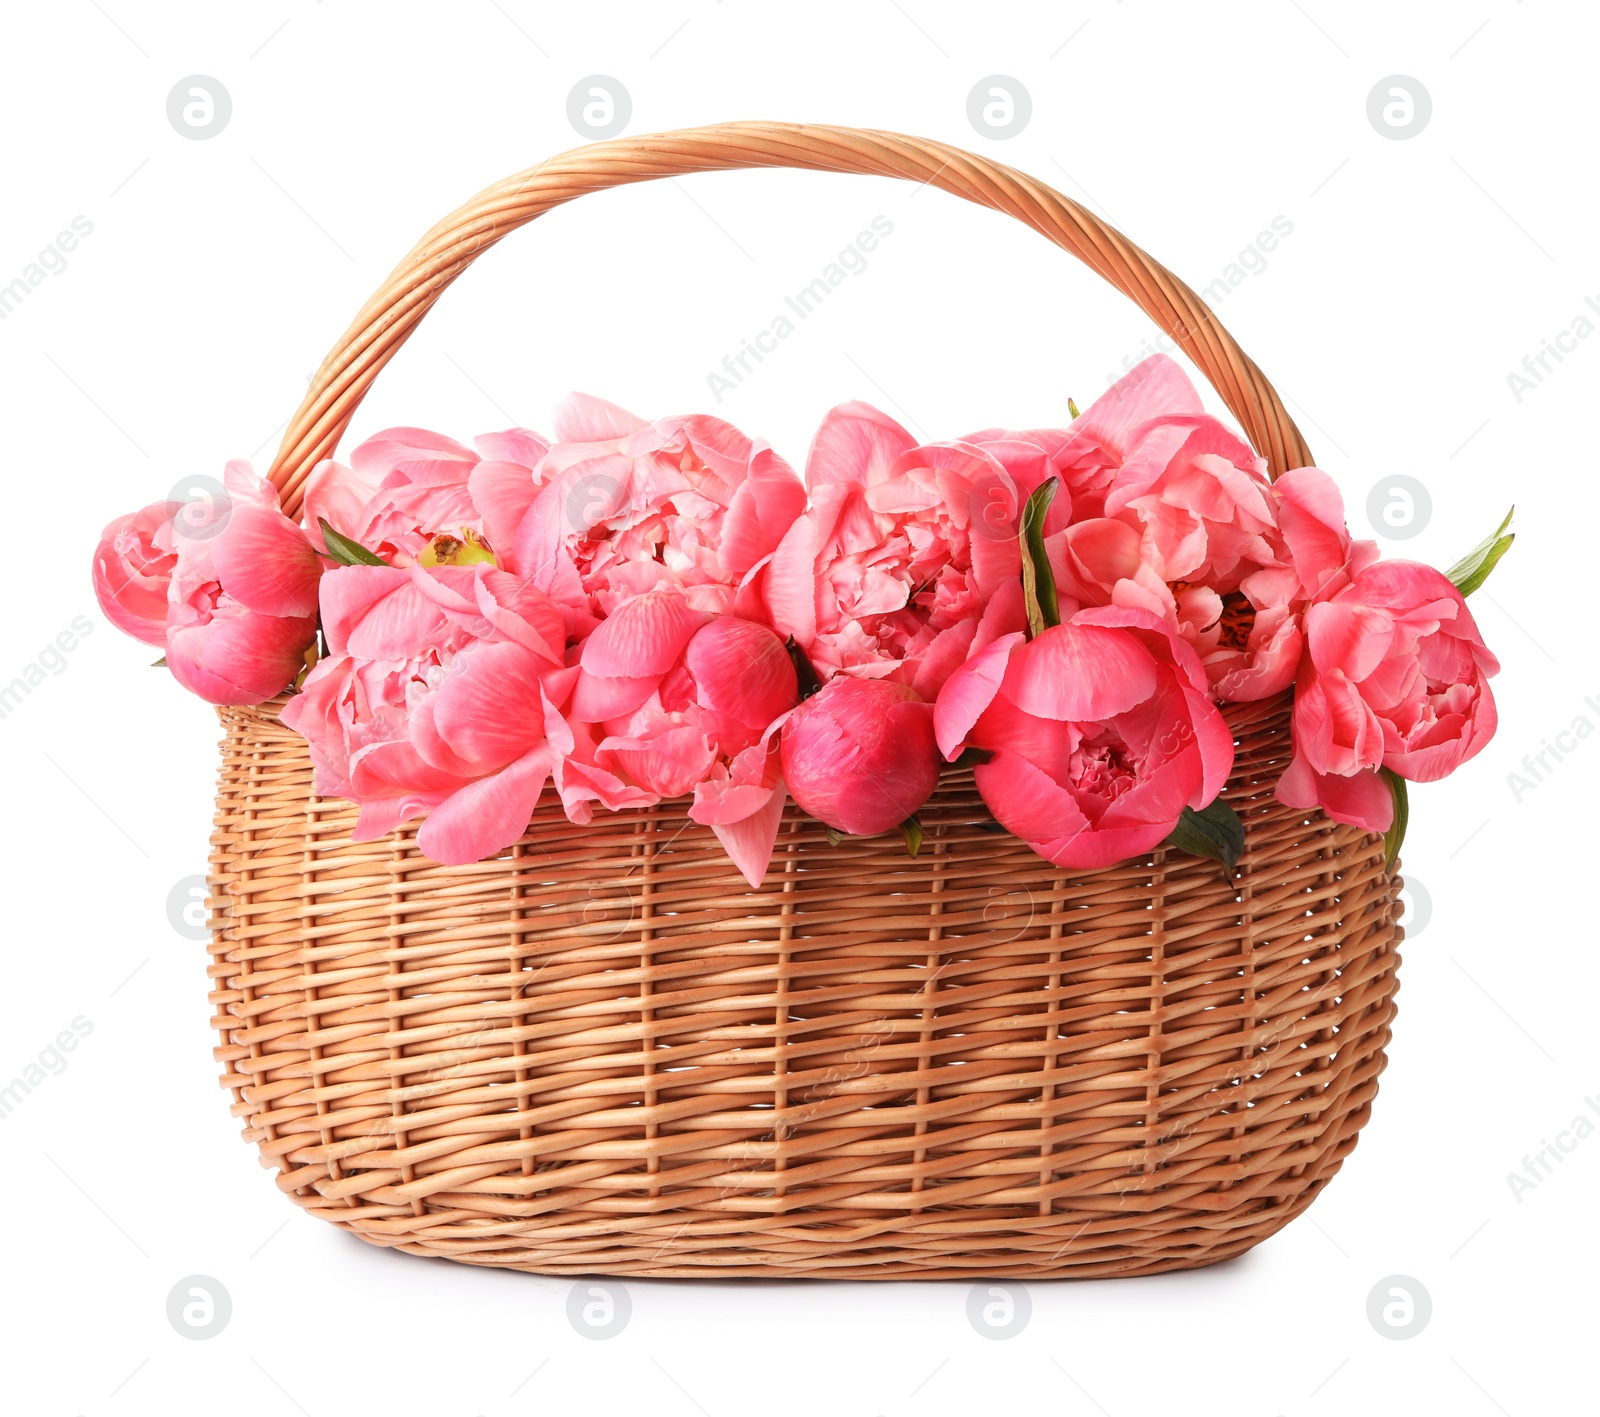 Photo of Wicker basket with beautiful pink peonies on white background